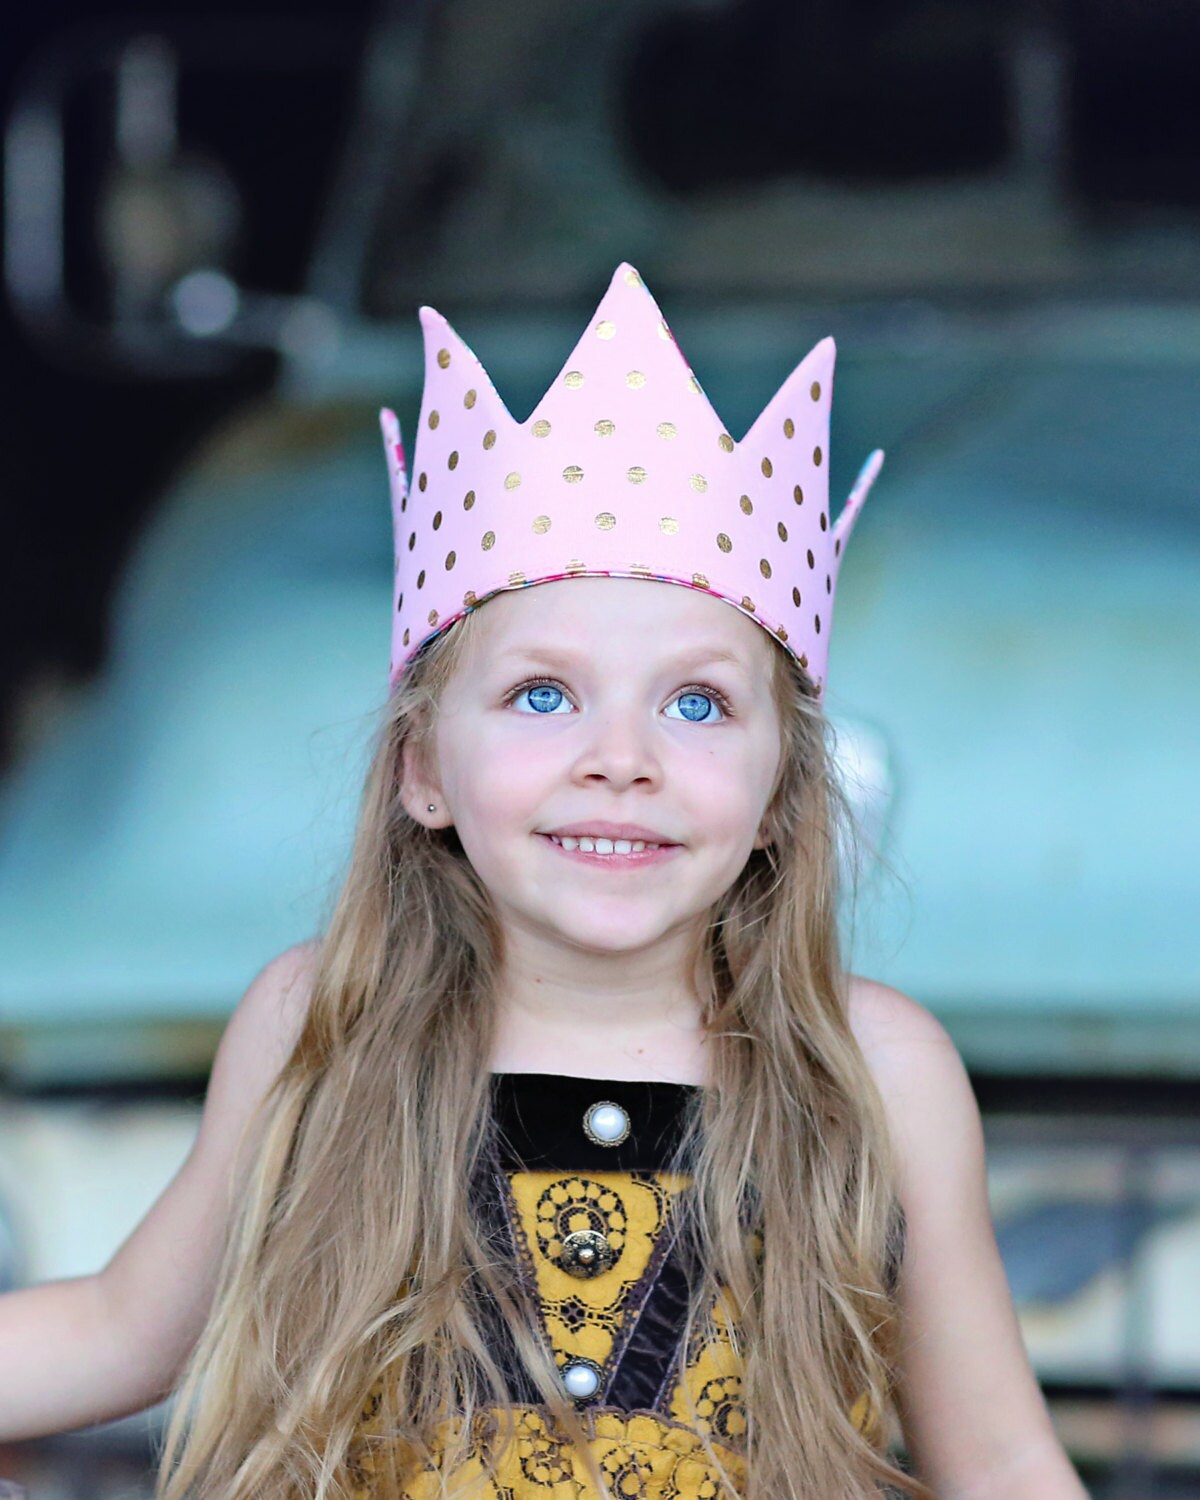 Dress Up Crown - Sequin Crown - Birthday Crown - Pink and Gold Polka Dot Crown Reverse Teal Floral - Fits all